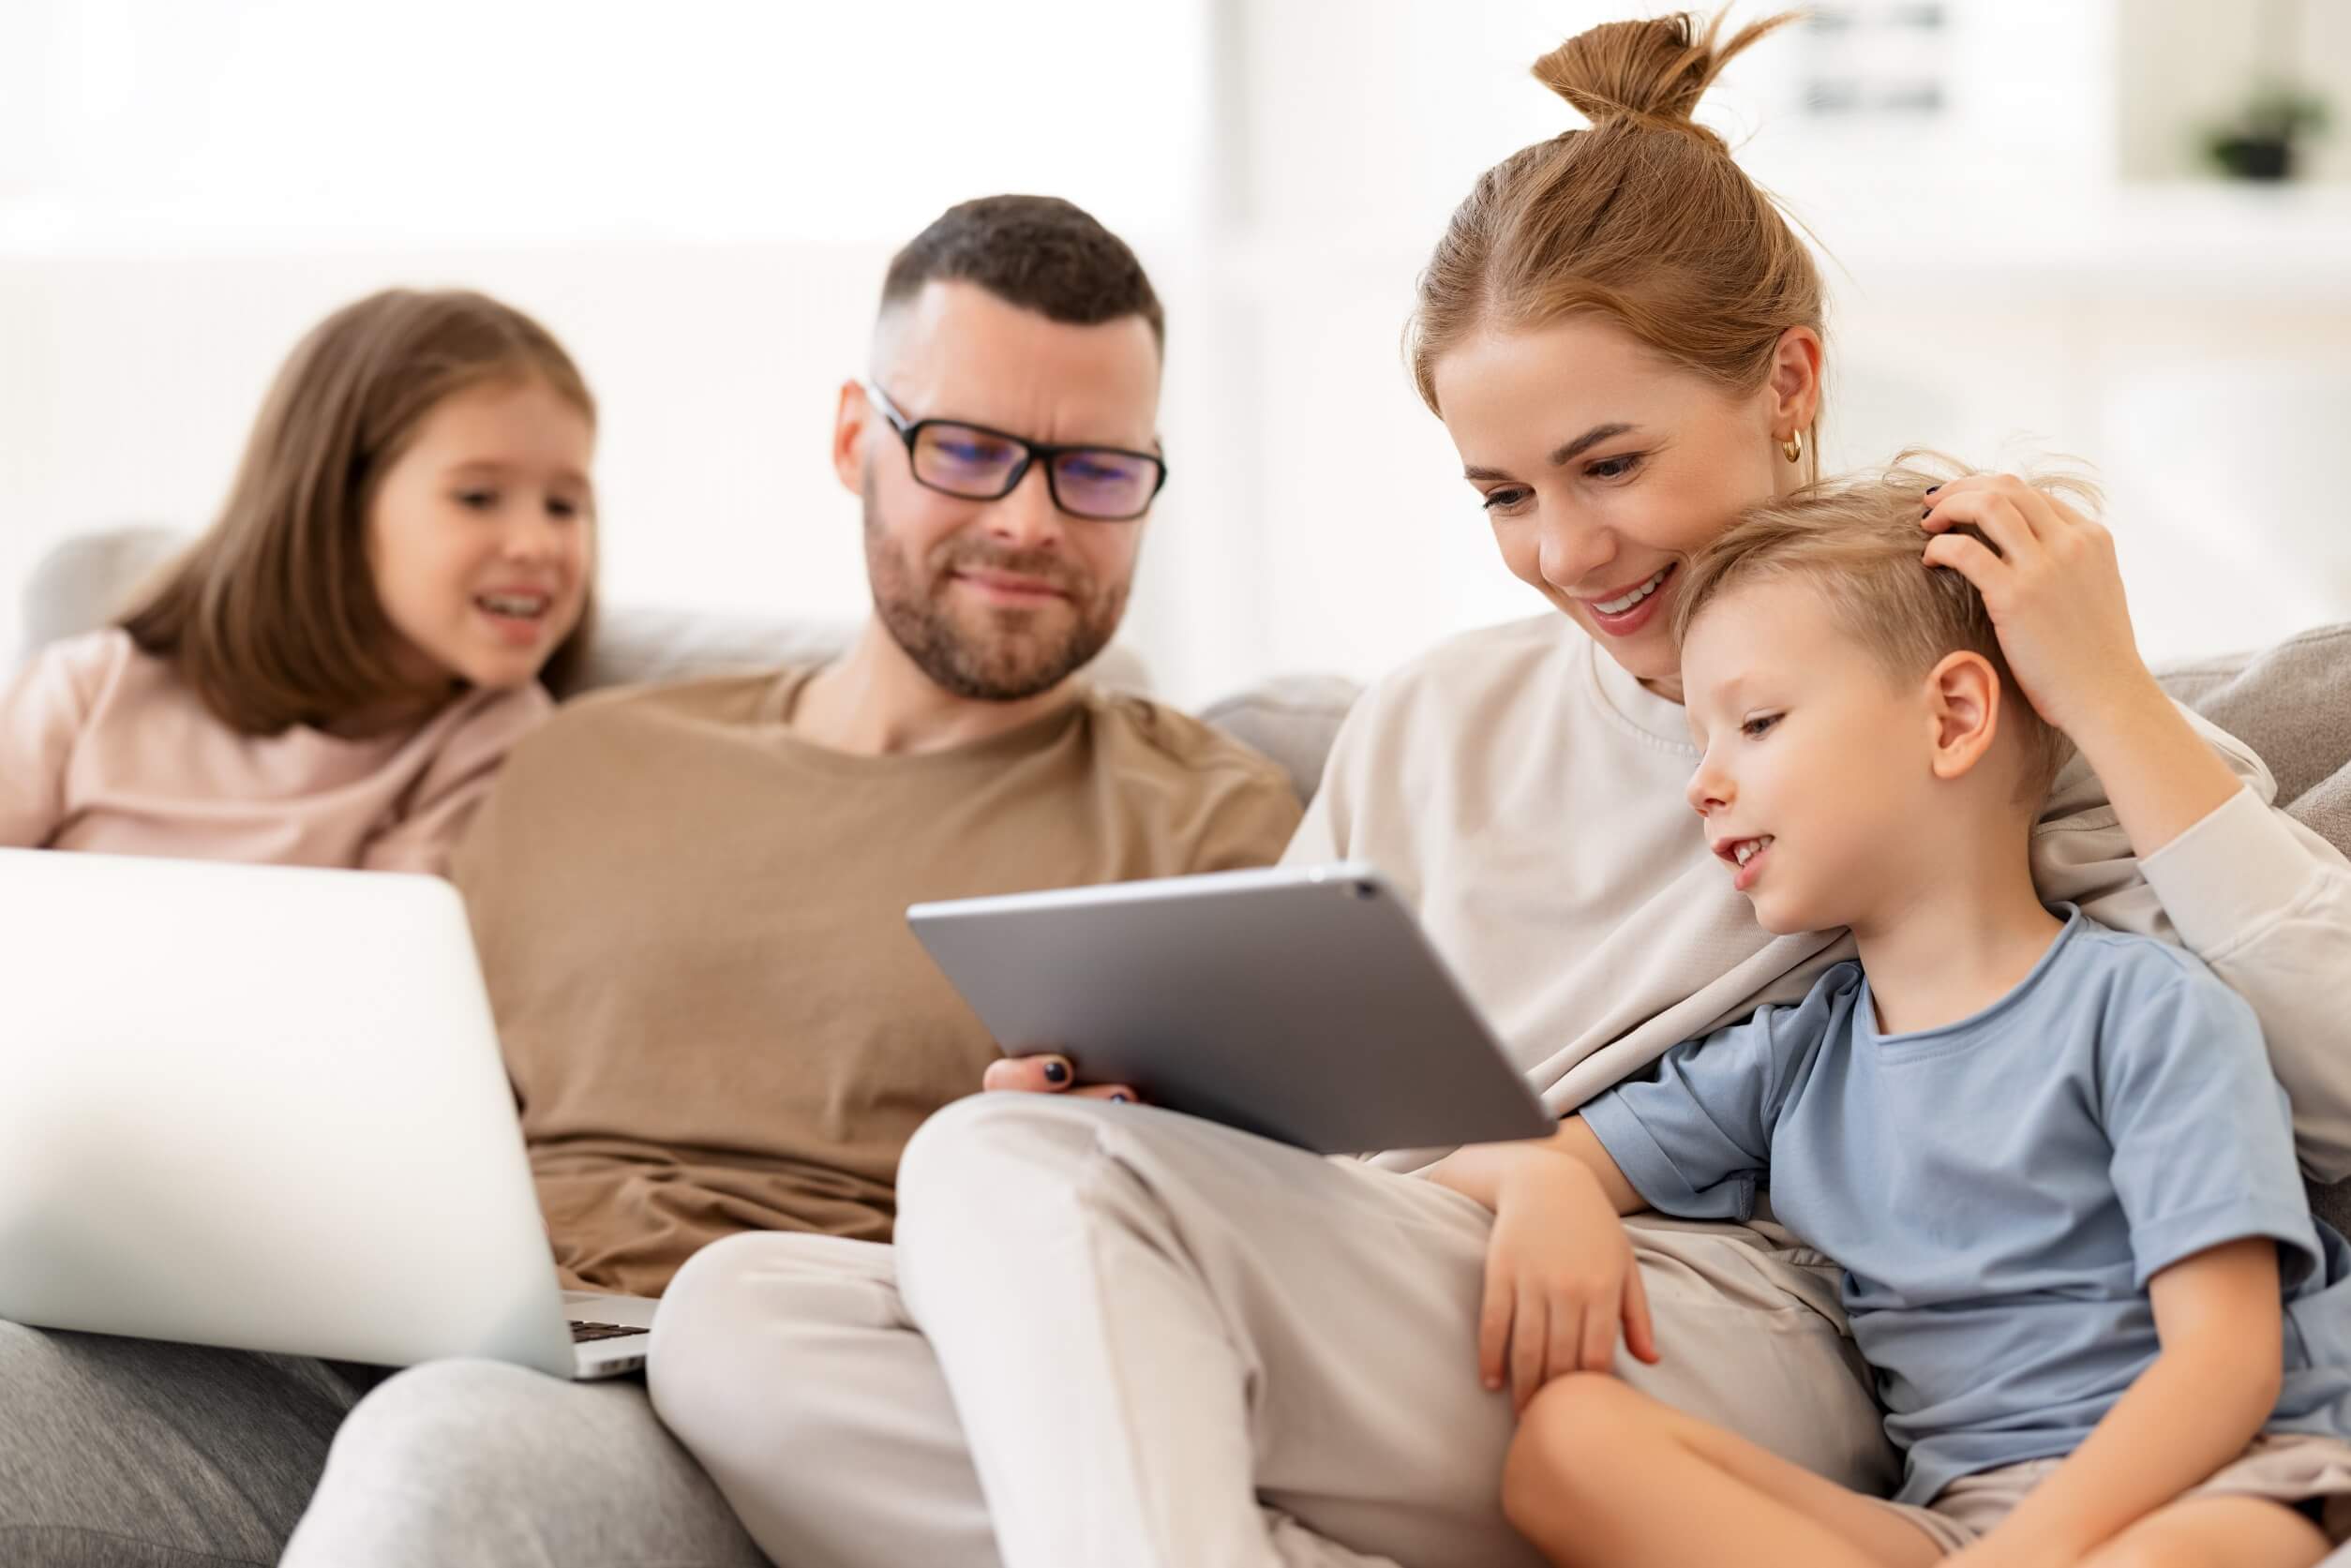 Parents watching something on a tablet with their children.